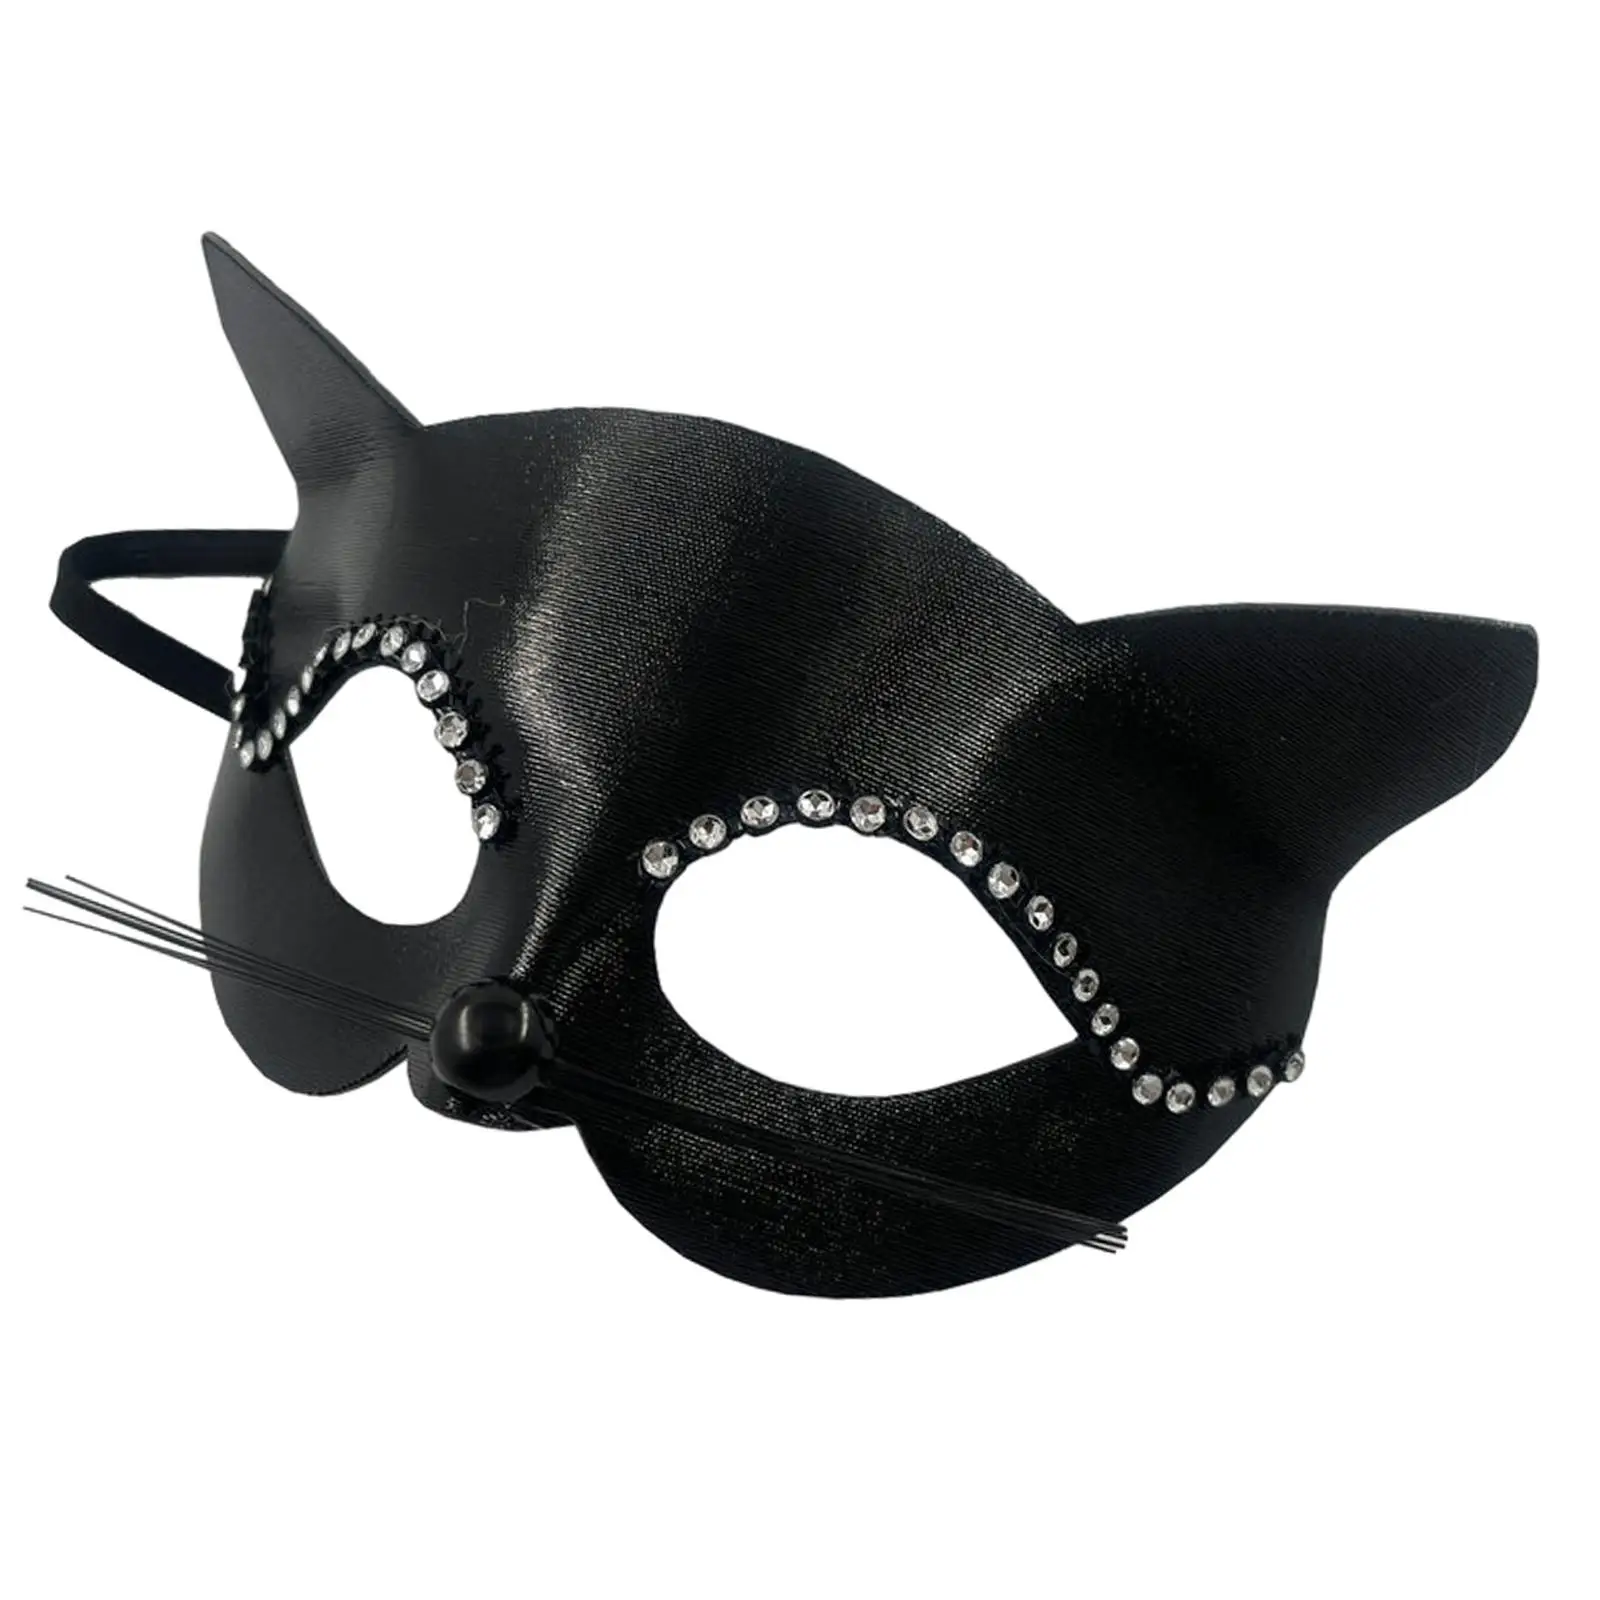 Black Cat Mask with Whiskers Masquerade Mask for Halloween Costume Show